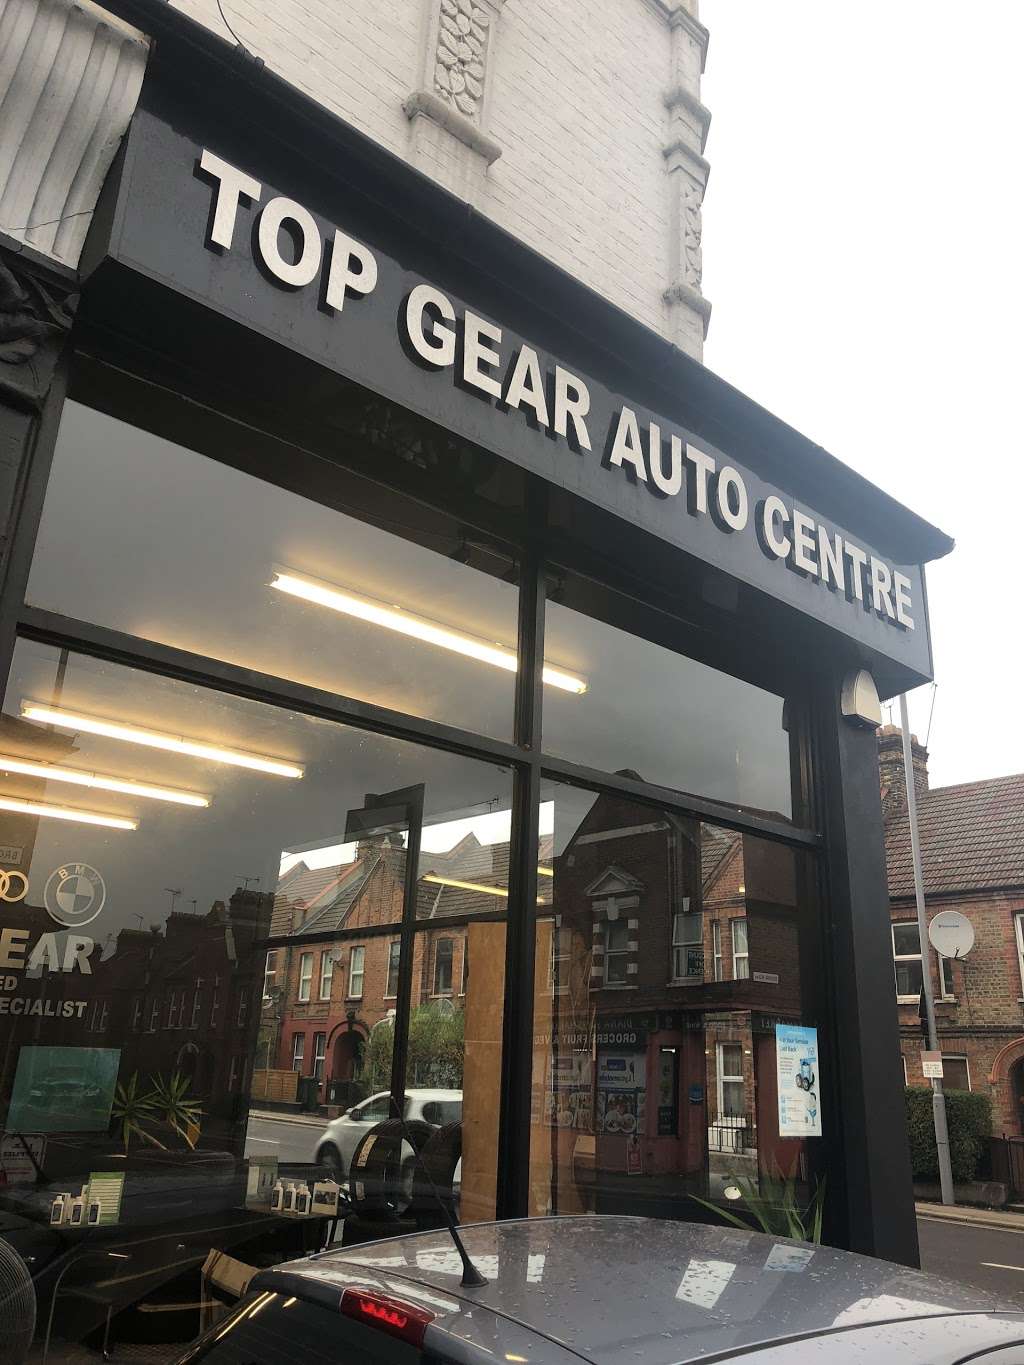 Top Gear Auto Centre | 378 Forest Rd, Walthamstow, London E17 5JF, UK | Phone: 020 8520 3710